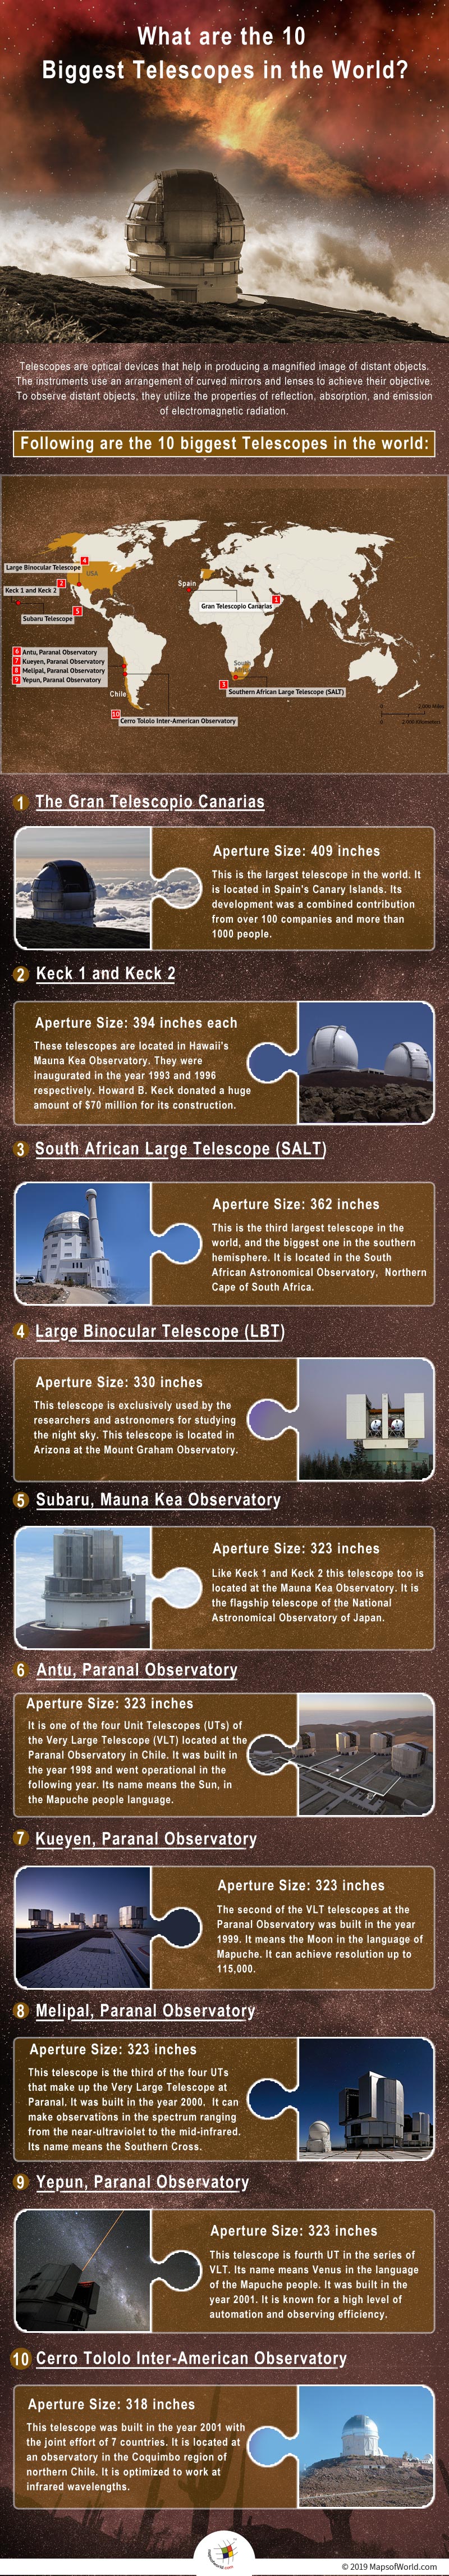 Infographic Giving Details of the 10 Biggest Telescopes in the World